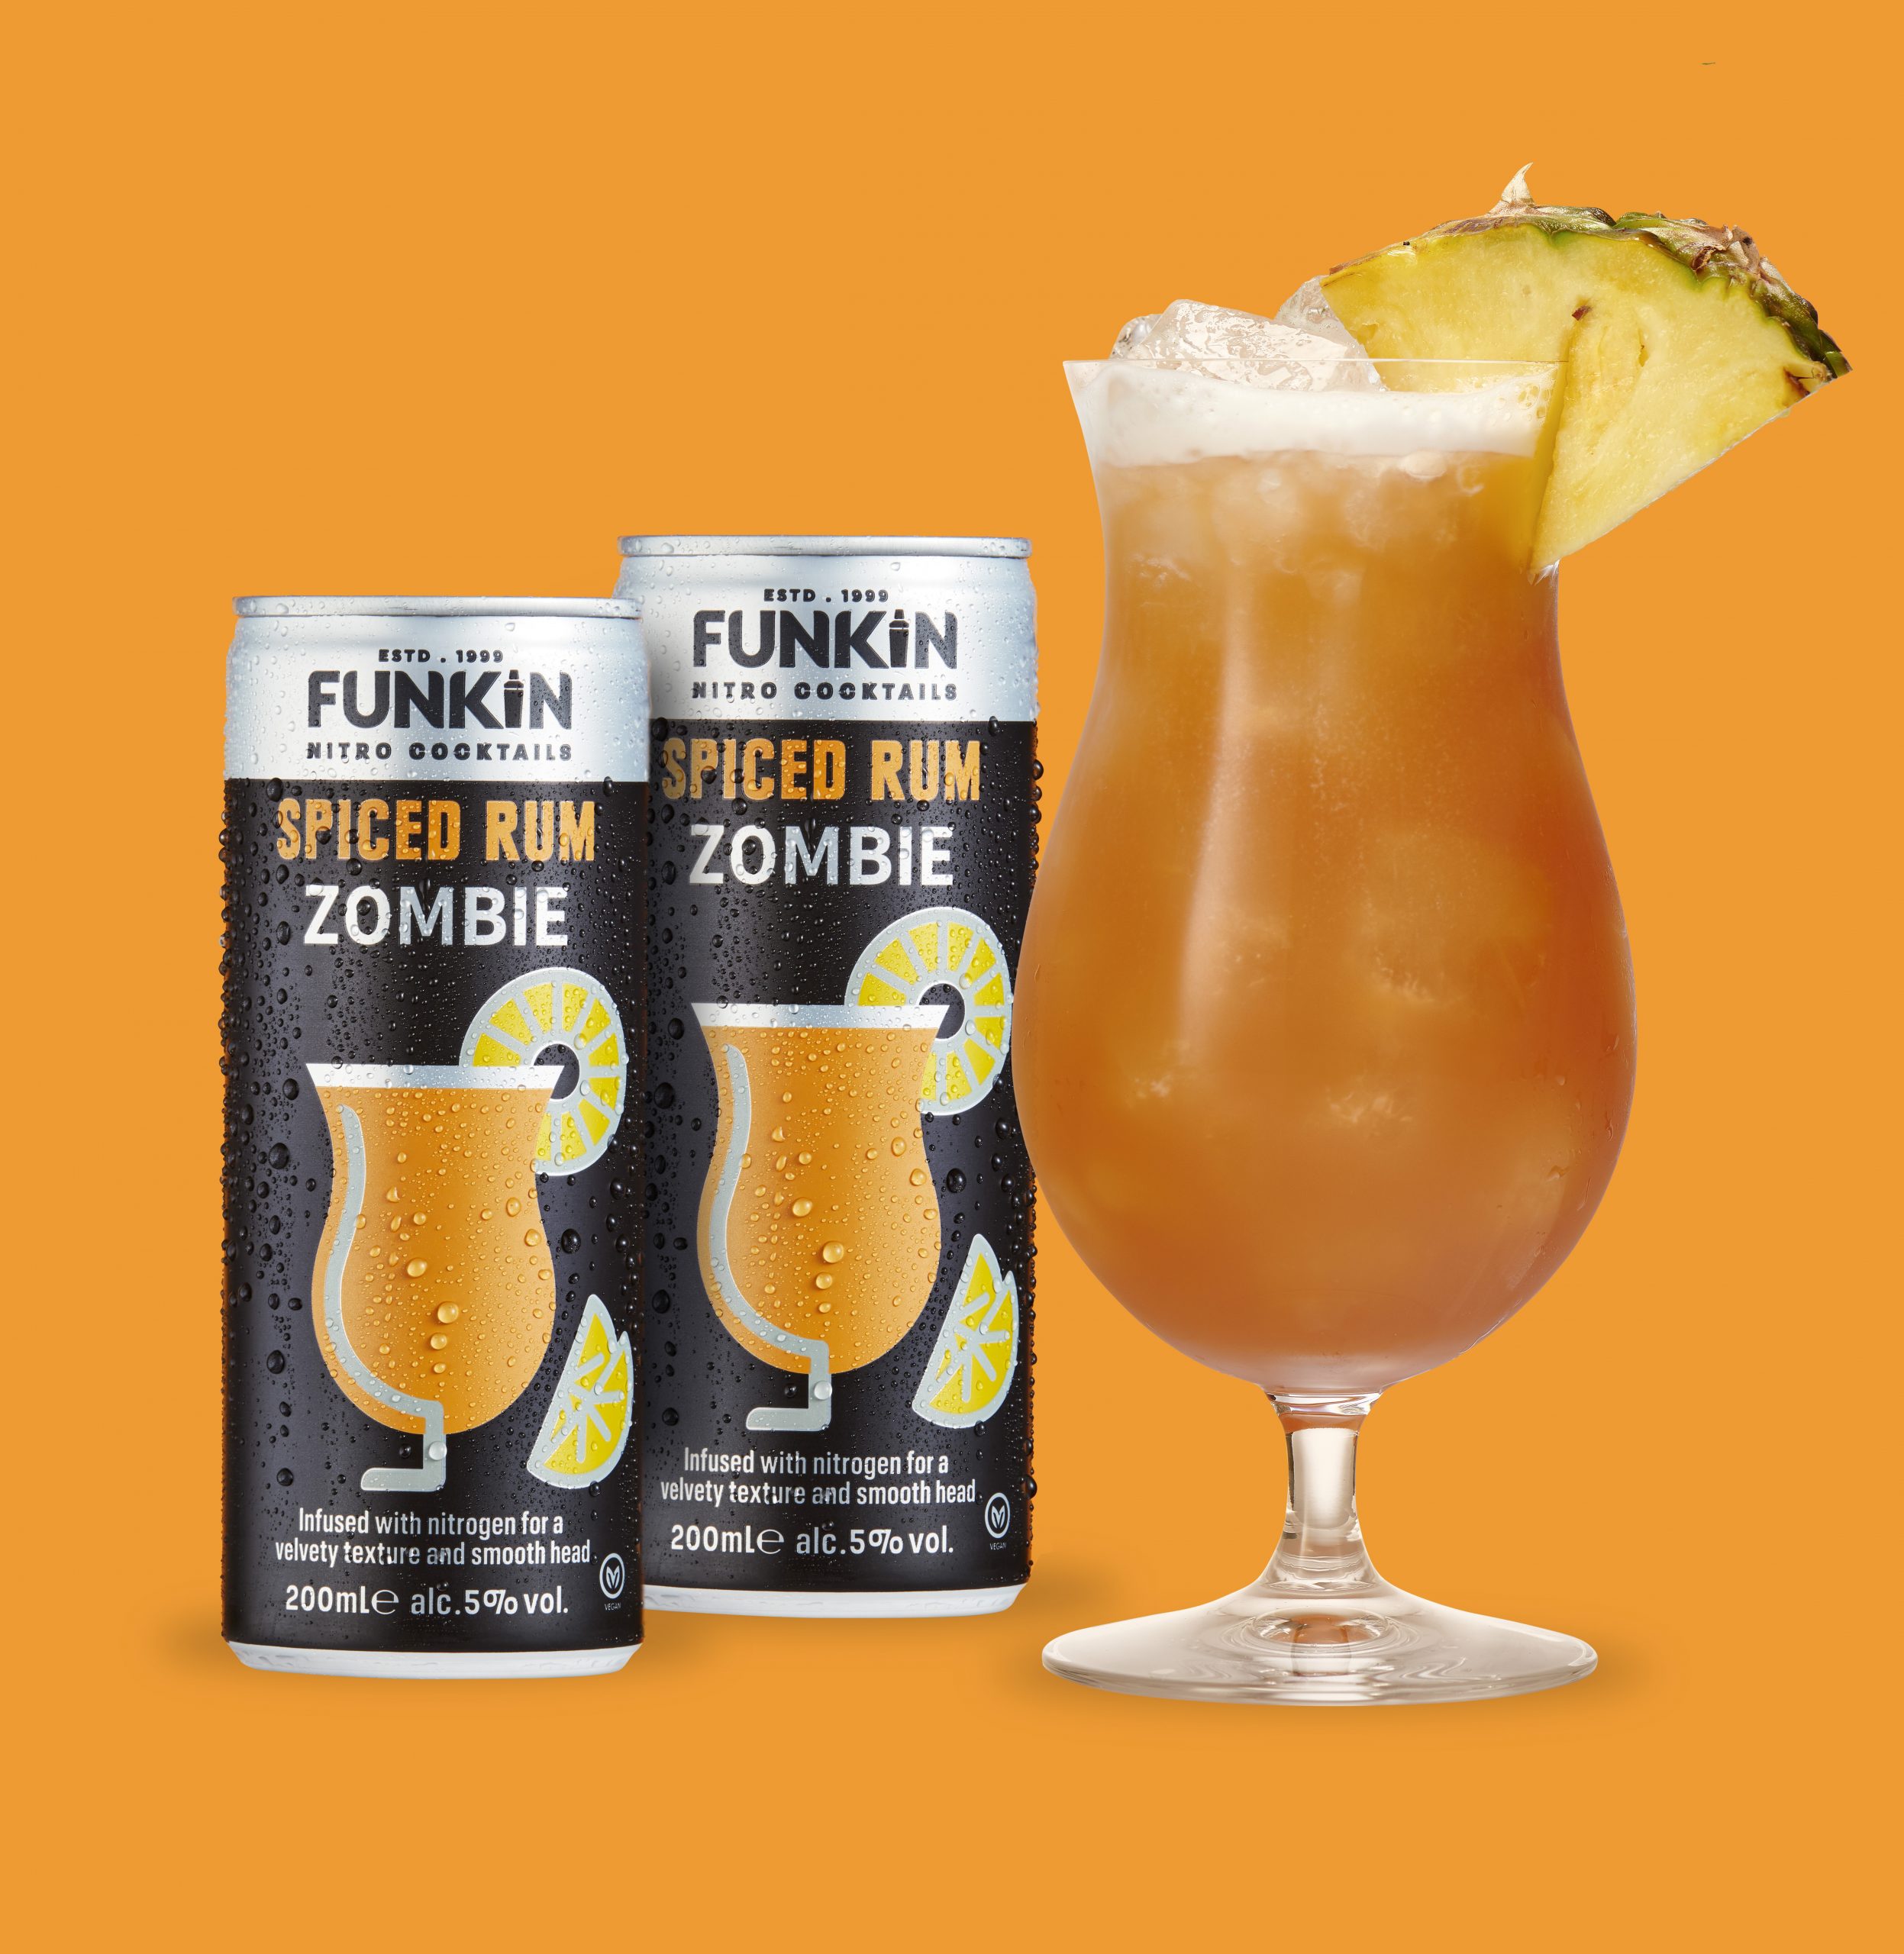 Funkin Cocktails launch new Spiced-Rum Zombie RTD Nitro can